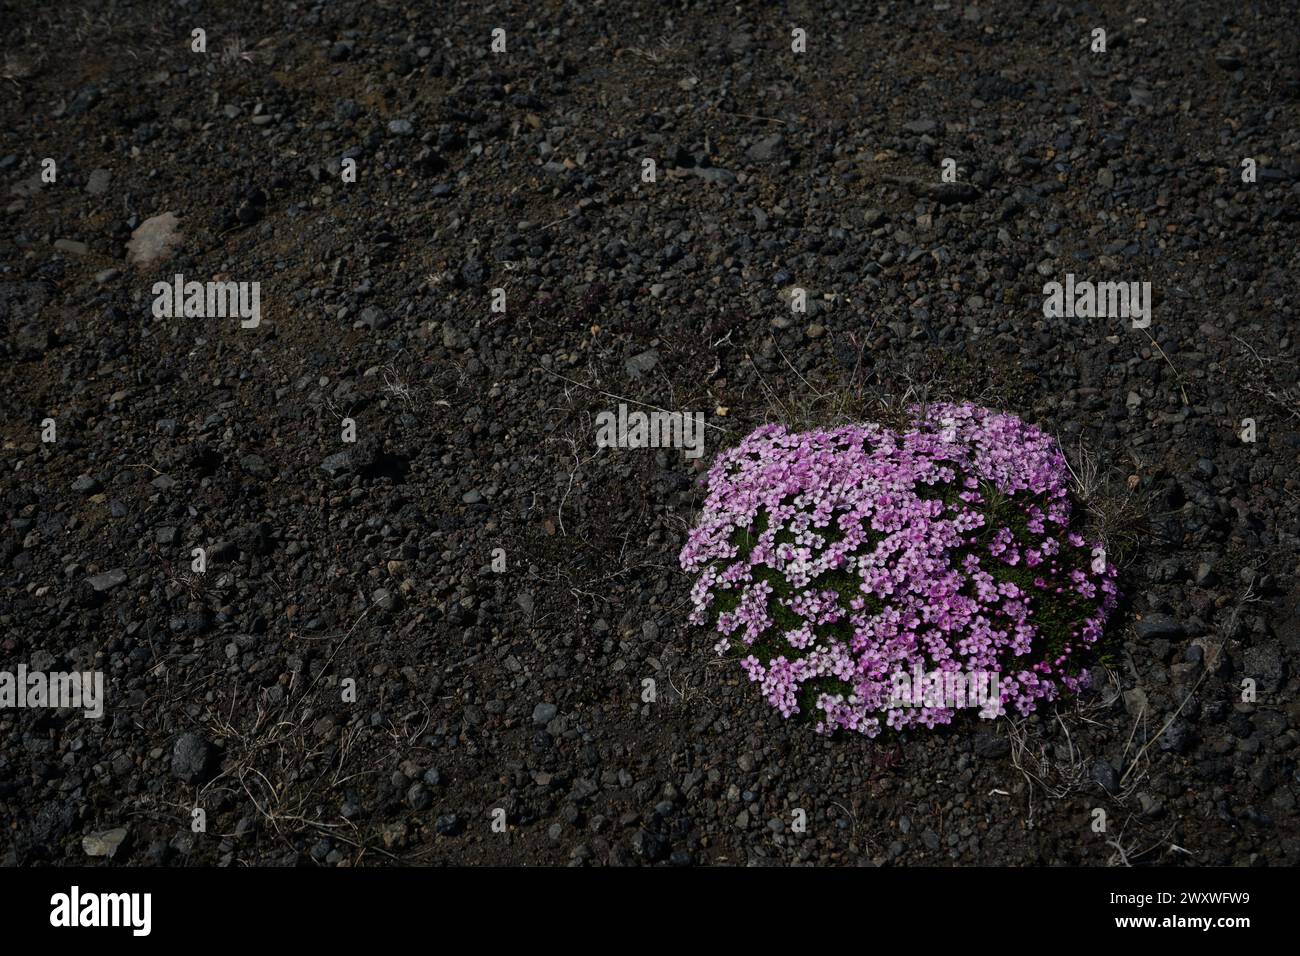 A pink flower bush contrast with the black volcanic soil in Iceland Stock Photo